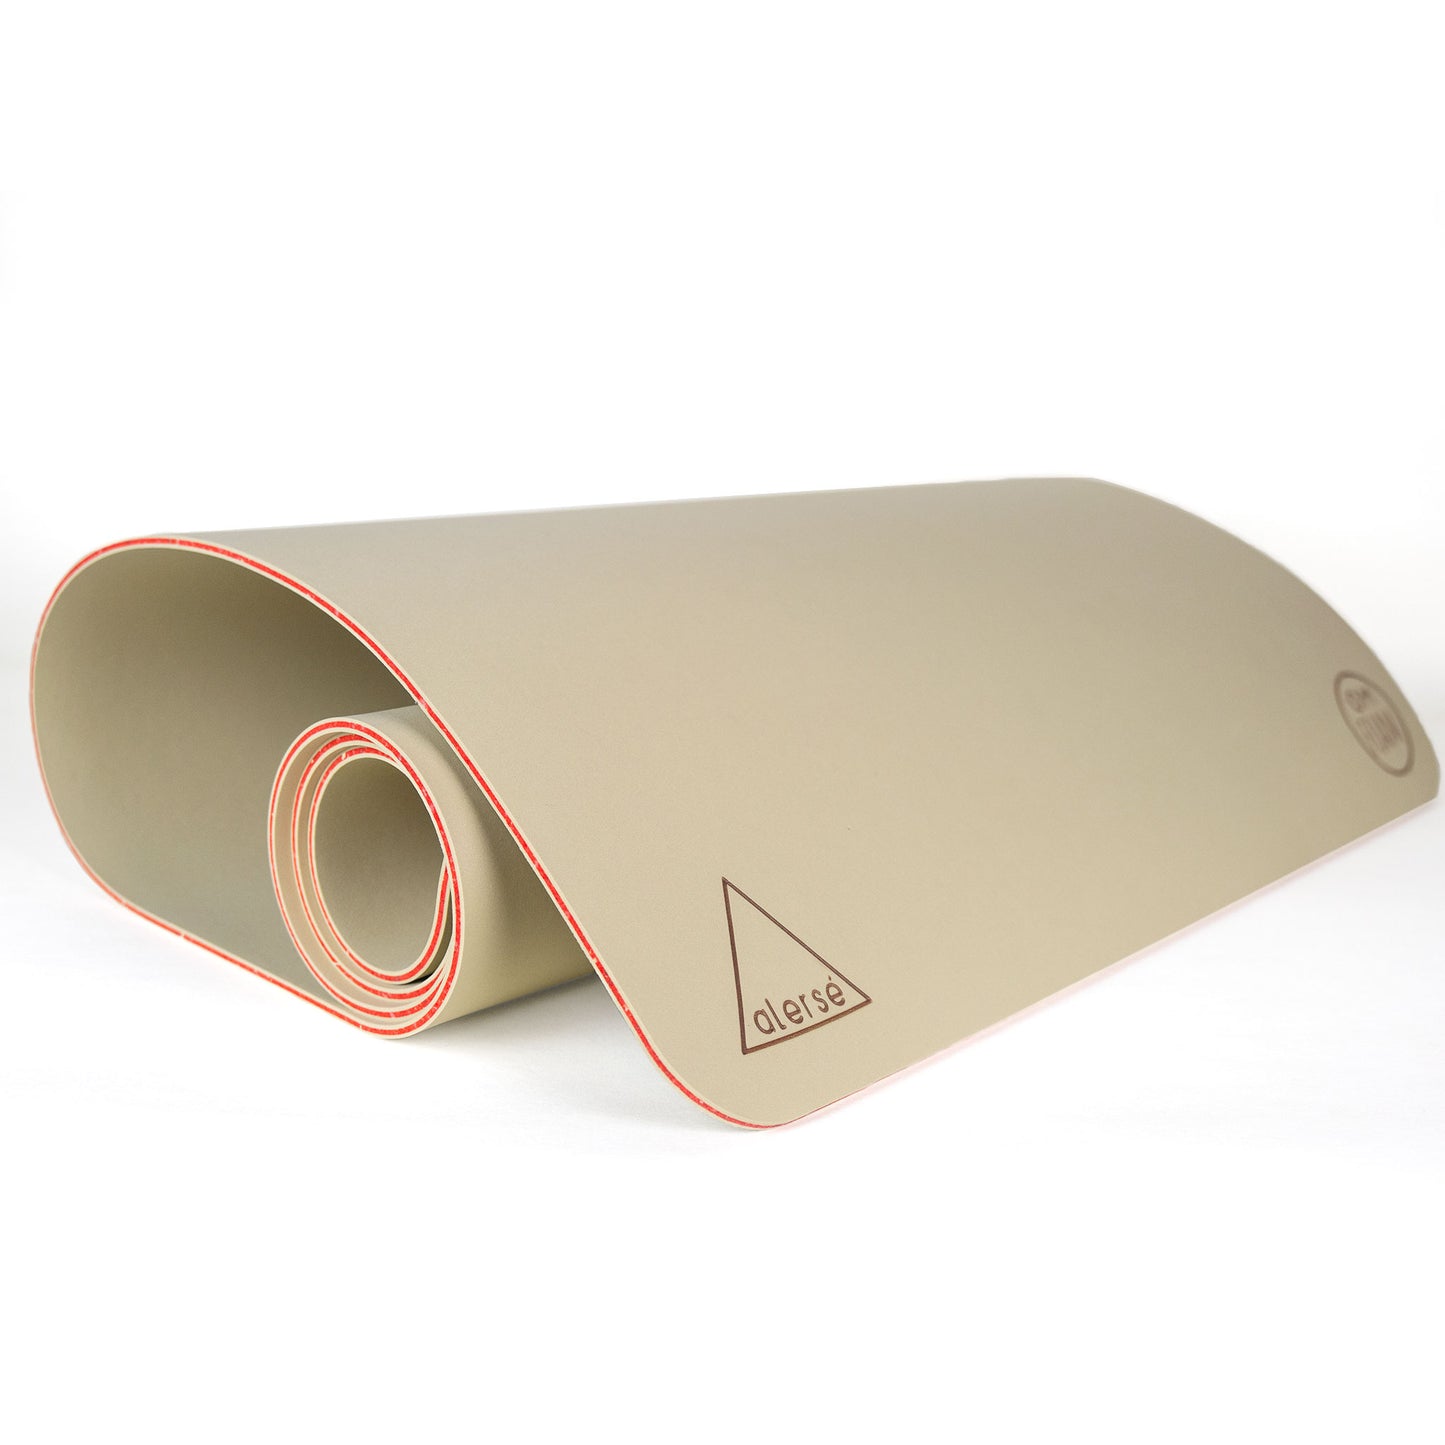 NEW!! alerse LIGHT Yoga Mat - Premium 6mm thick, 2.5lbs. - Sand Color